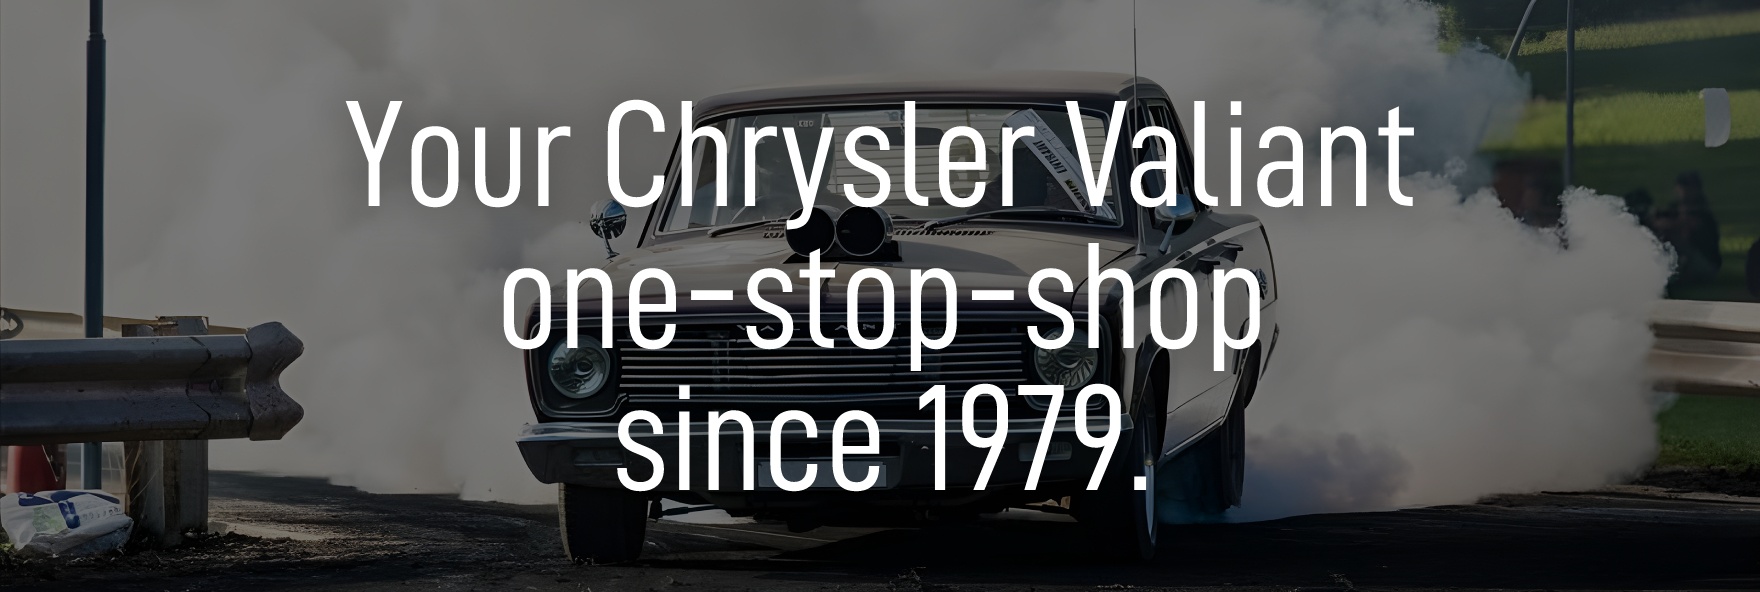 Your Chrysler Valiant one-stop-shop since 1979.